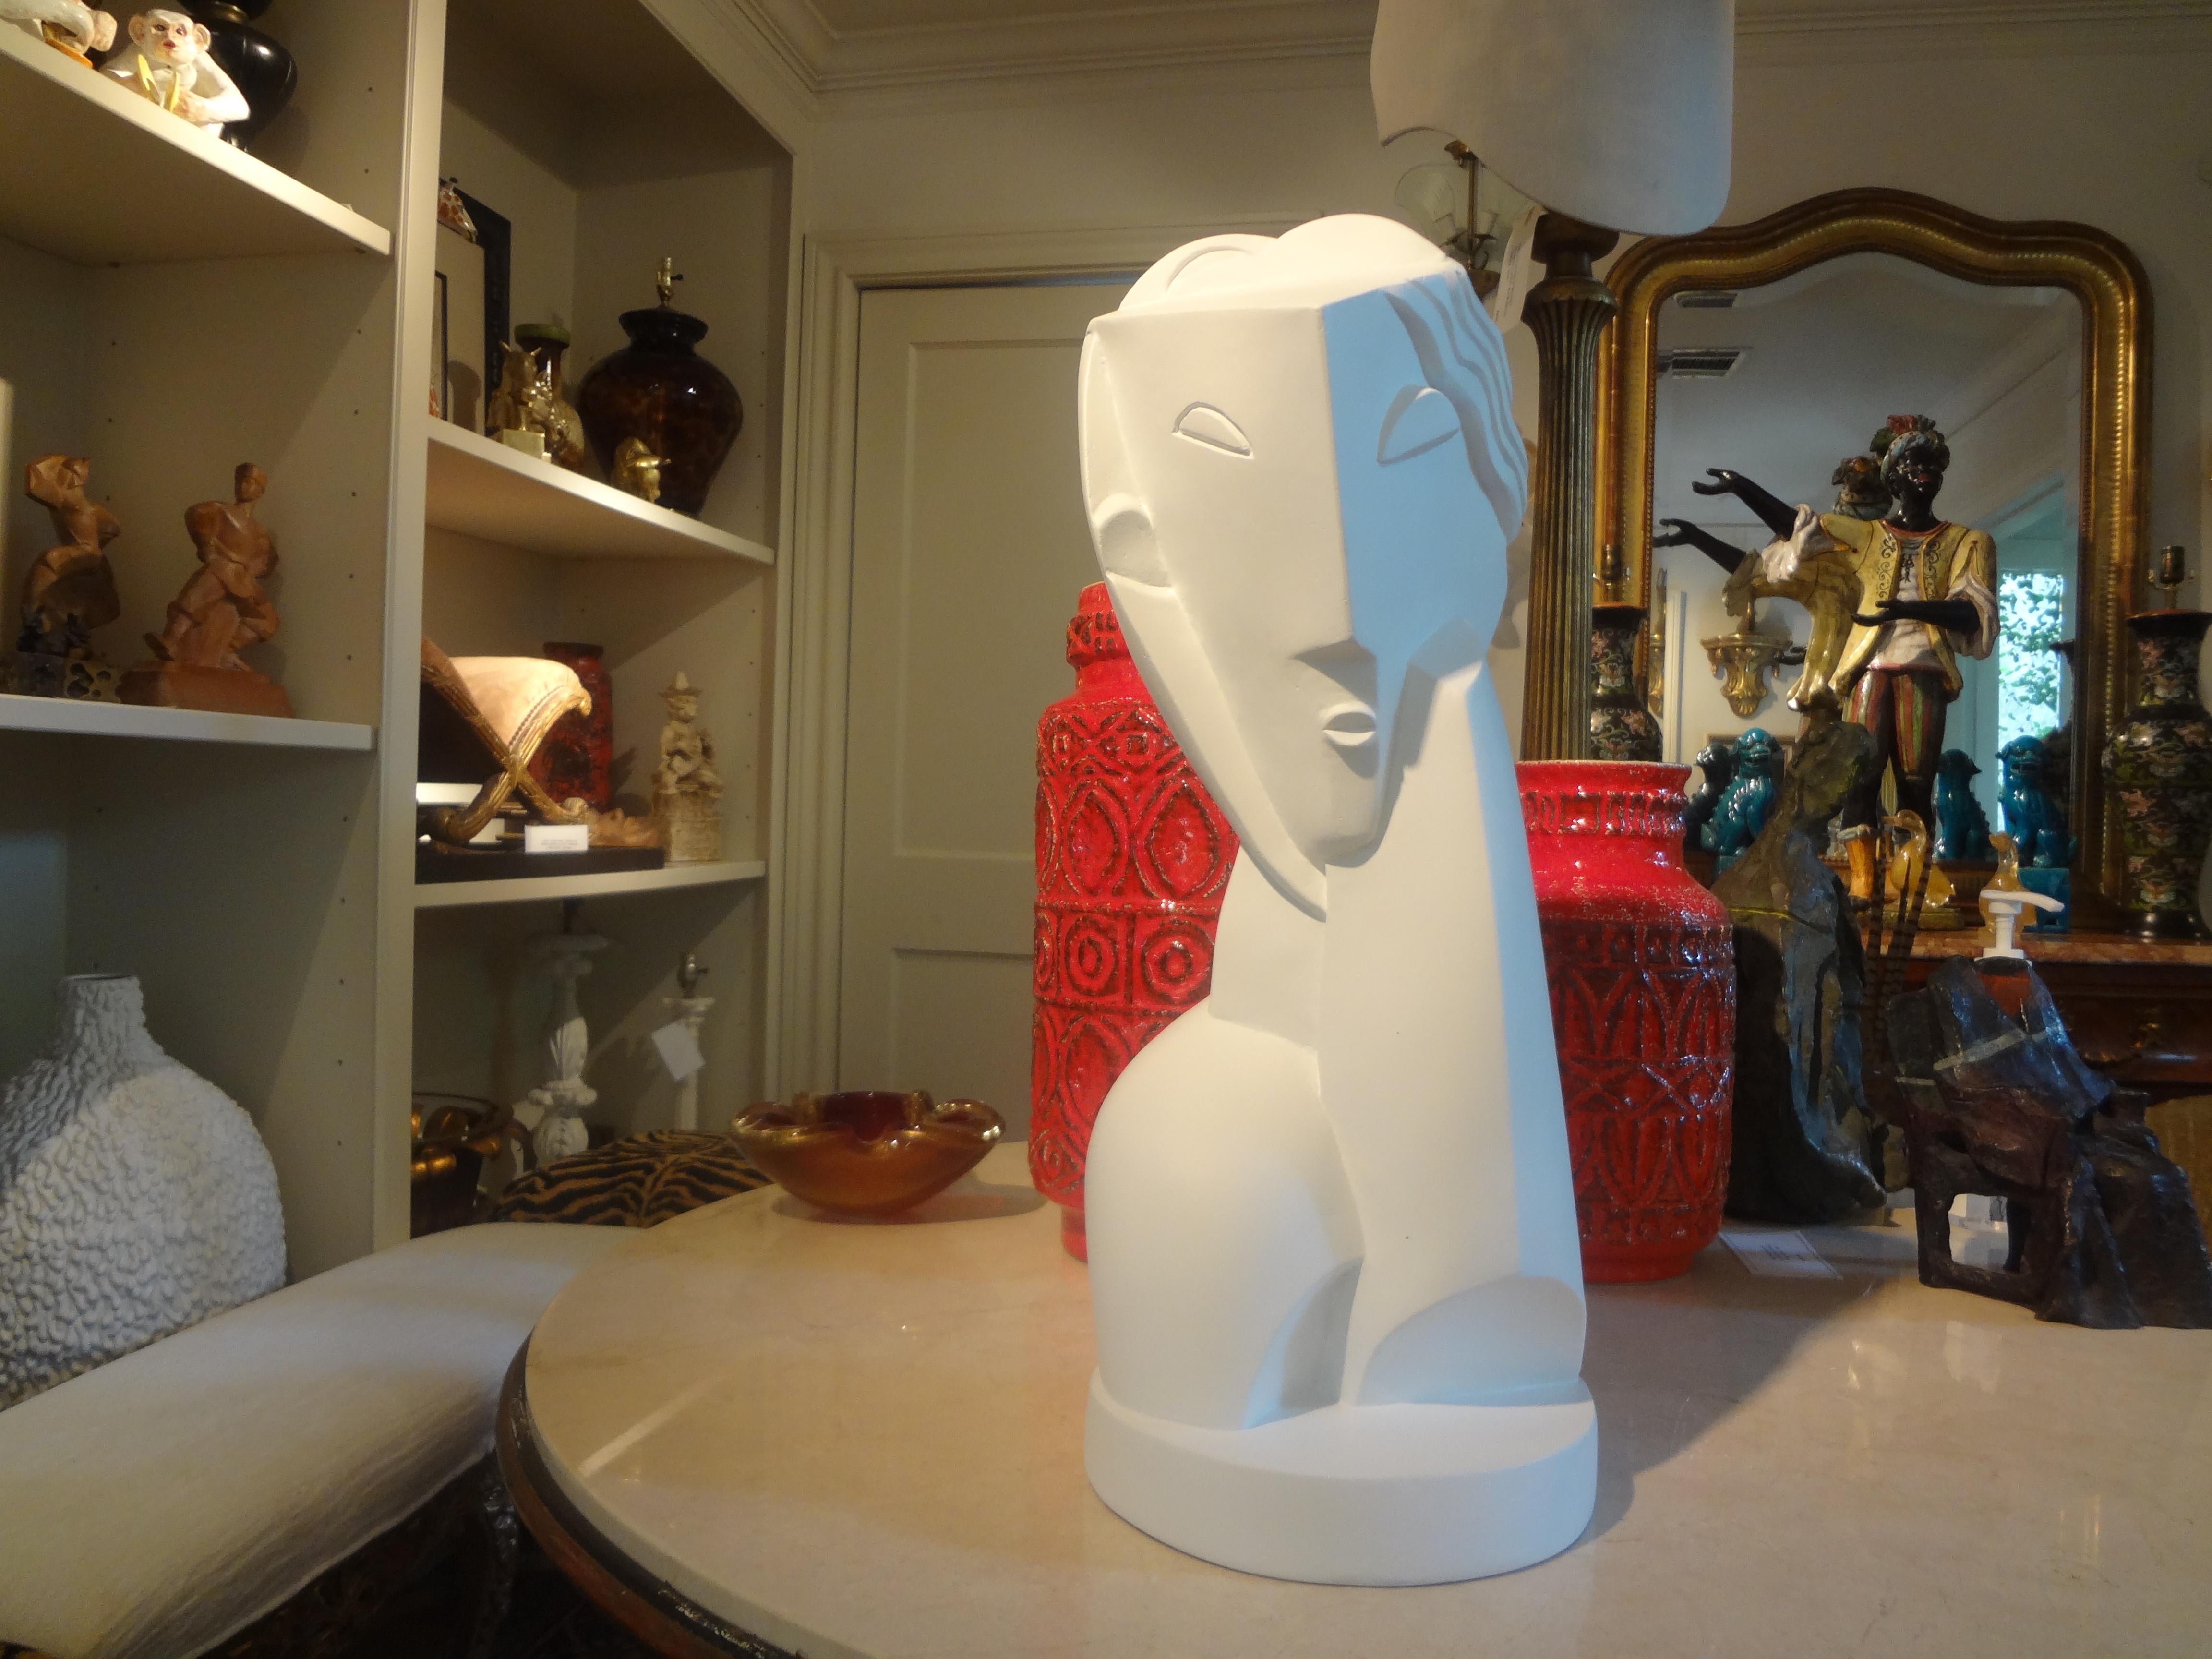 Stunning Art Deco geometric style abstract plaster bust sculpture of a woman. Beautifully executed and lovely from every angle!